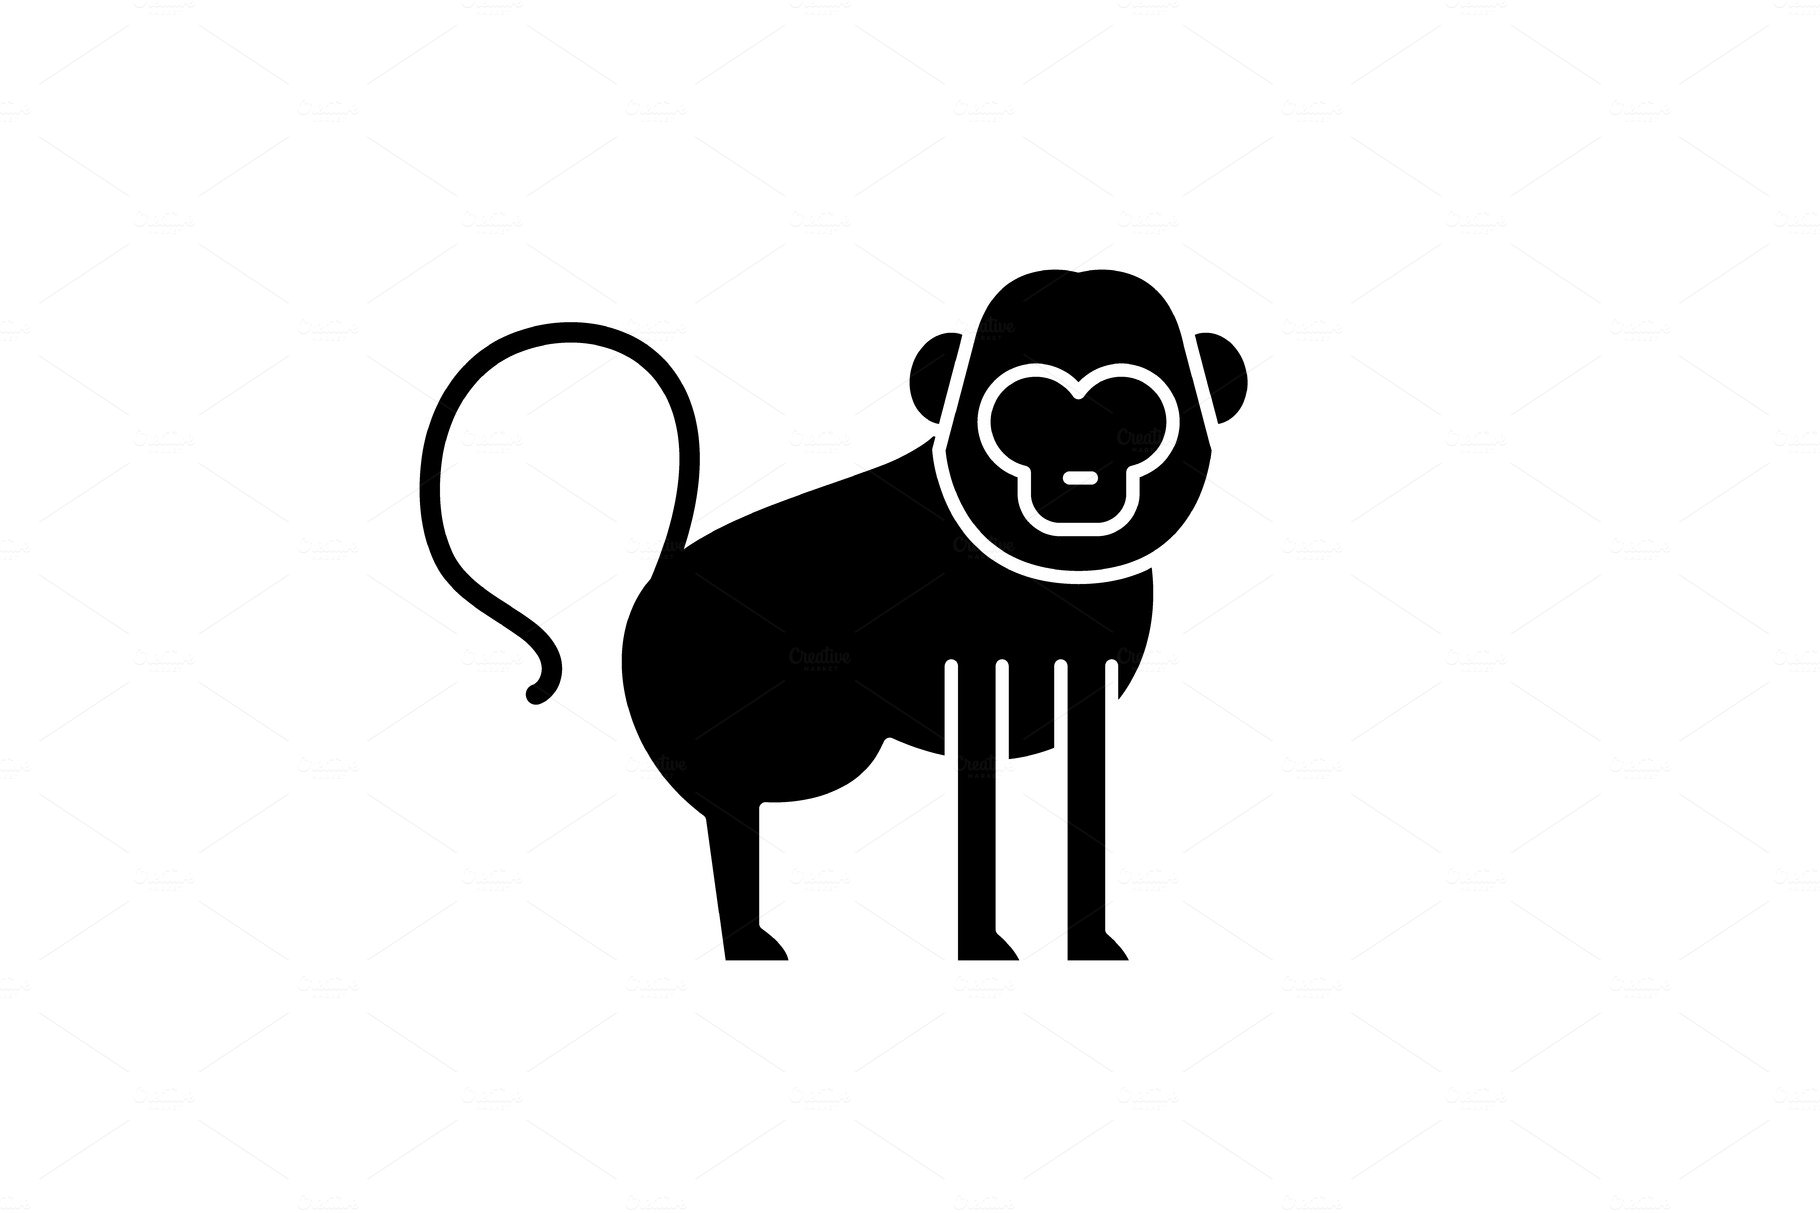 Baboon black icon, vector sign on cover image.